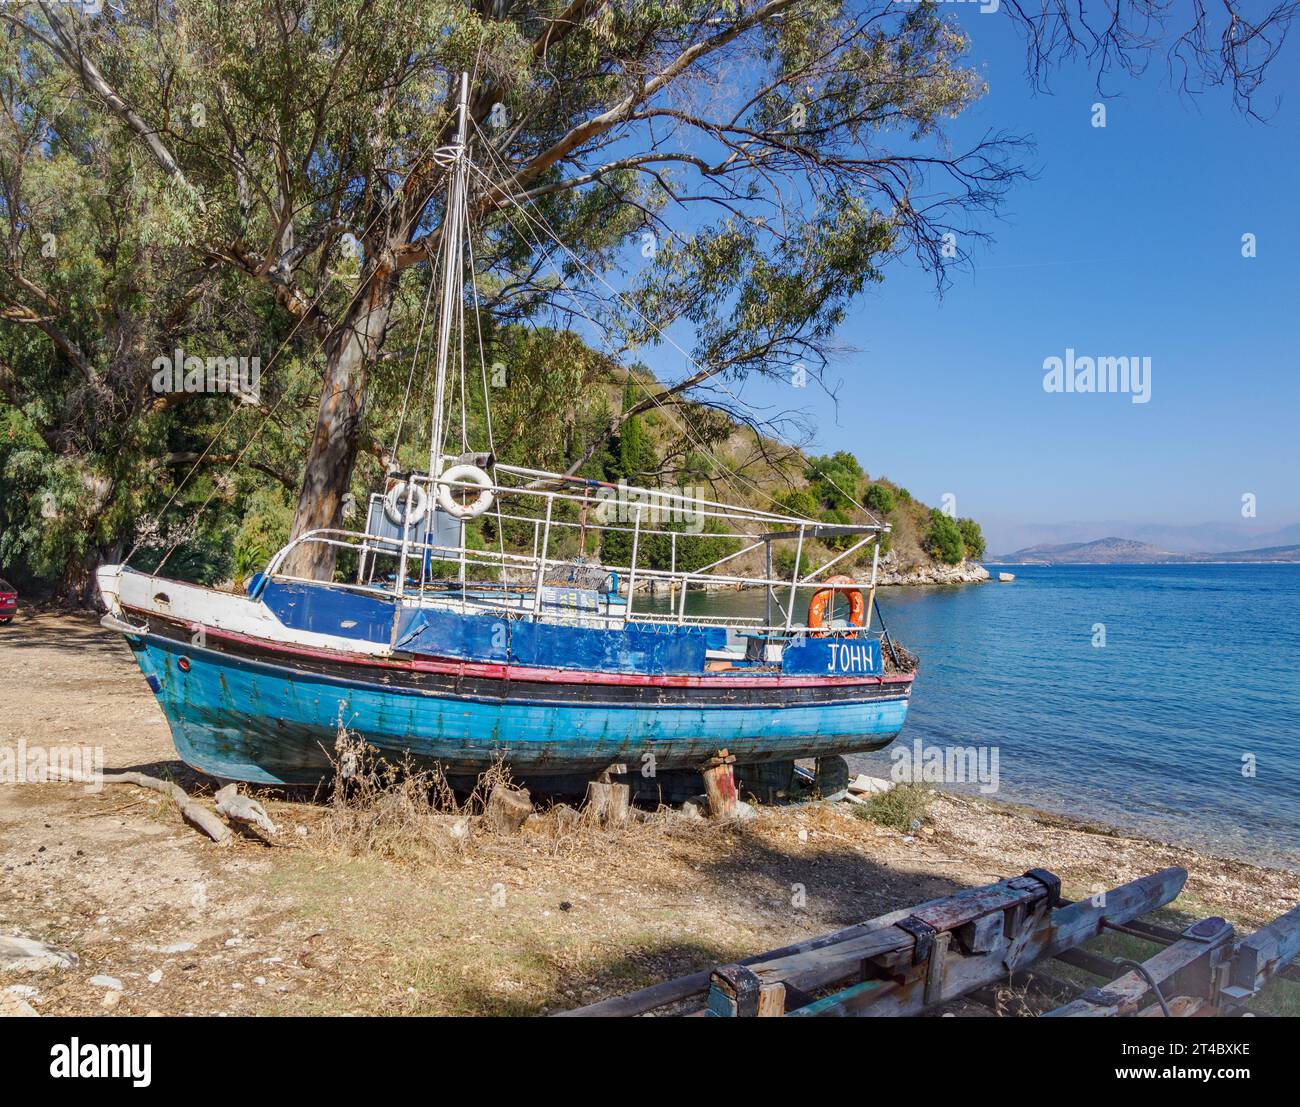 Beached pleasure boat The John at Chouchoulio beach a quiet cove on the north-east coast of Corfu in the Ionian Islands of Greece Stock Photo